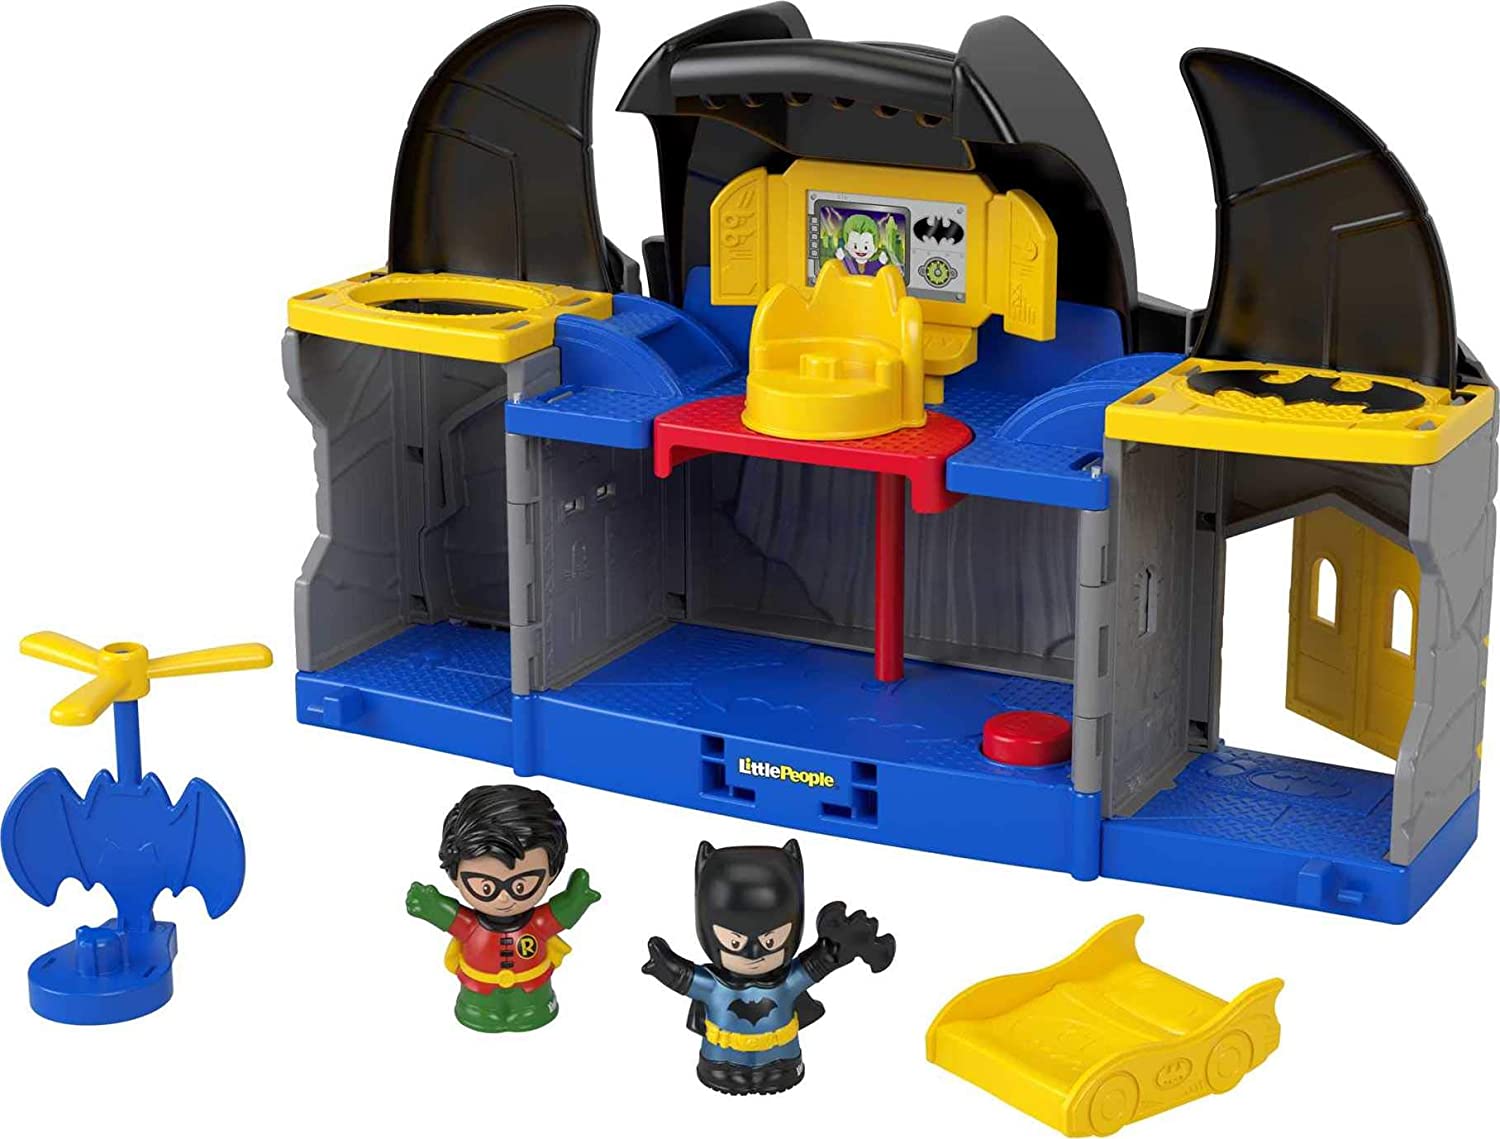 Fisher-Price Little People DC Super Friends Batcave Batman Playset w/ Figures $13.30 + Free Shipping w/ Prime or $25+